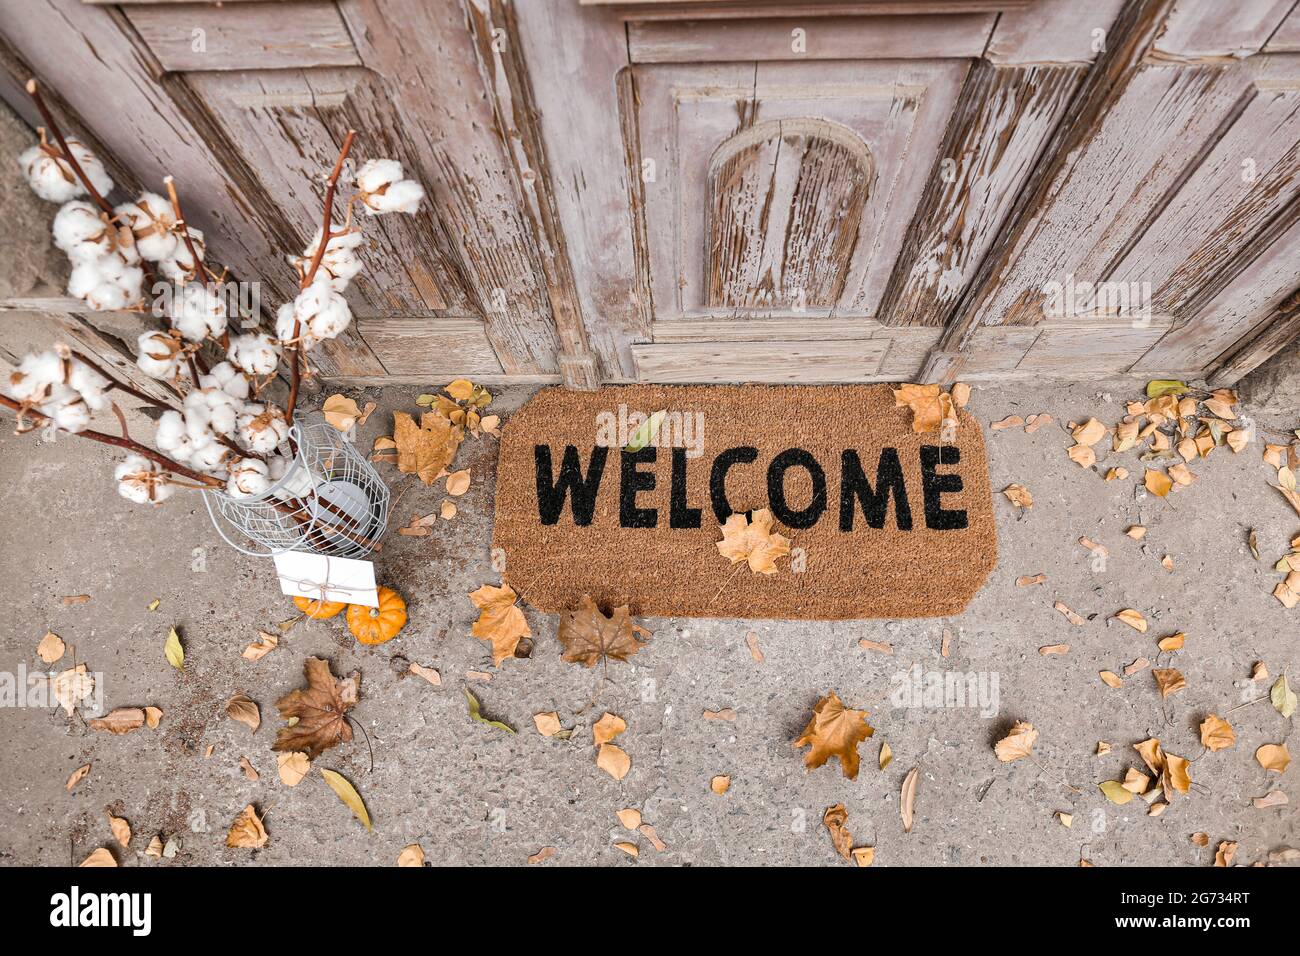 https://c8.alamy.com/comp/2G734RT/doormat-with-cotton-flowers-and-letter-near-entrance-of-house-on-autumn-day-2G734RT.jpg